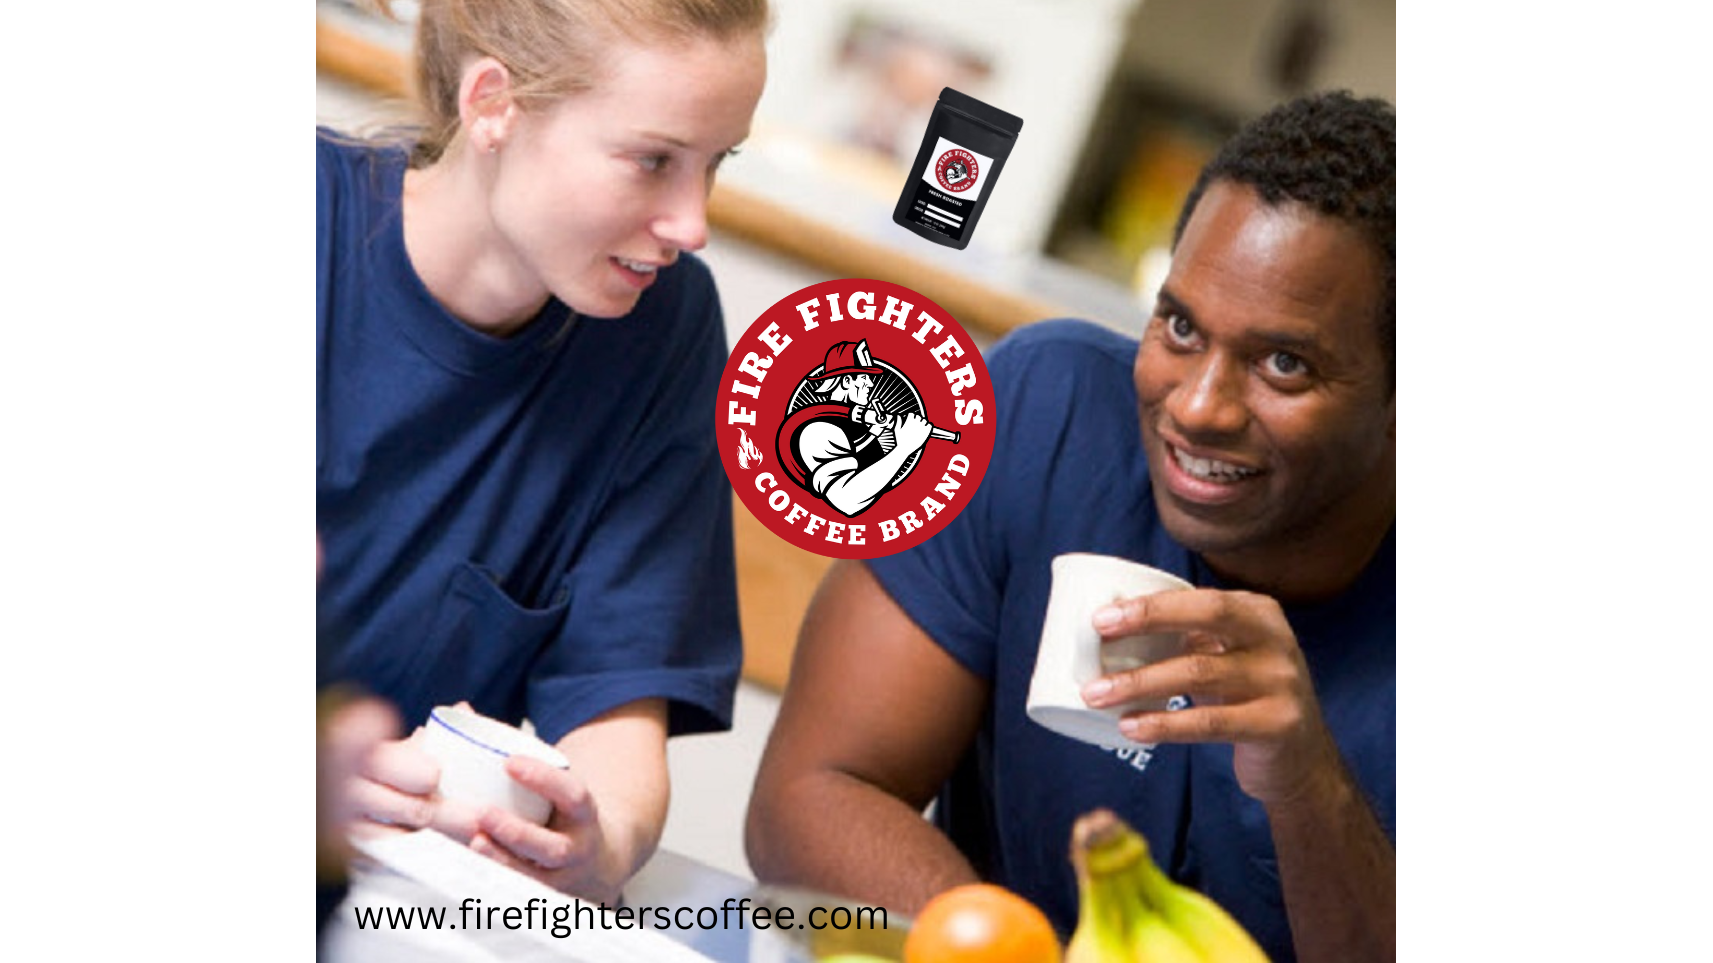 Firefighter Coffee Gives Back To First Responders With Discount On Premium Blend